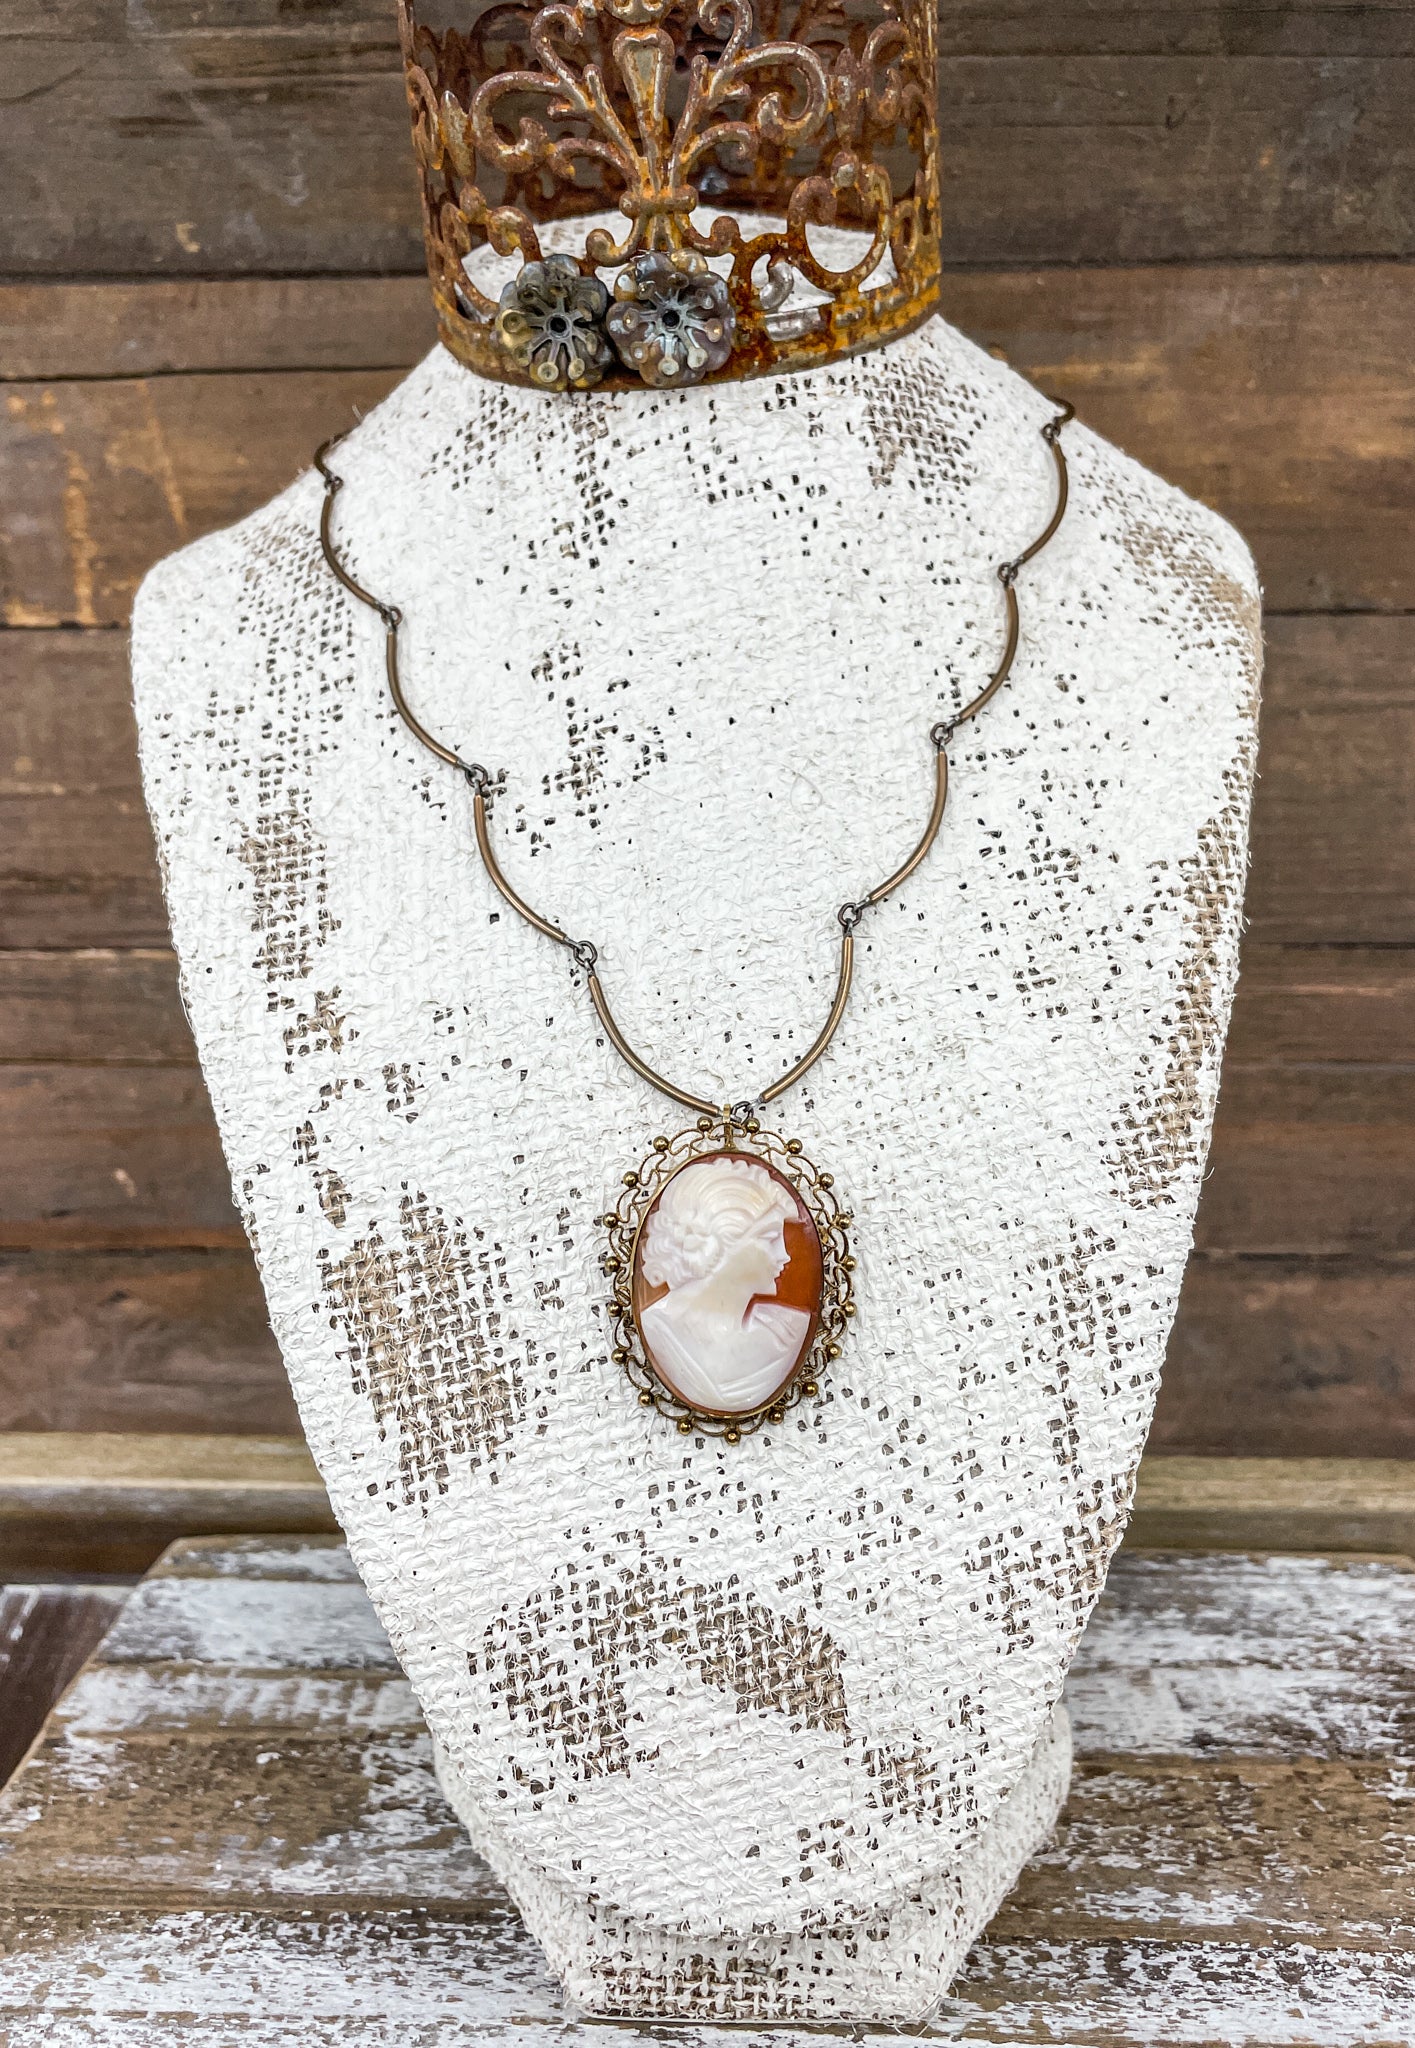 Vintage Shell Cameo Necklace